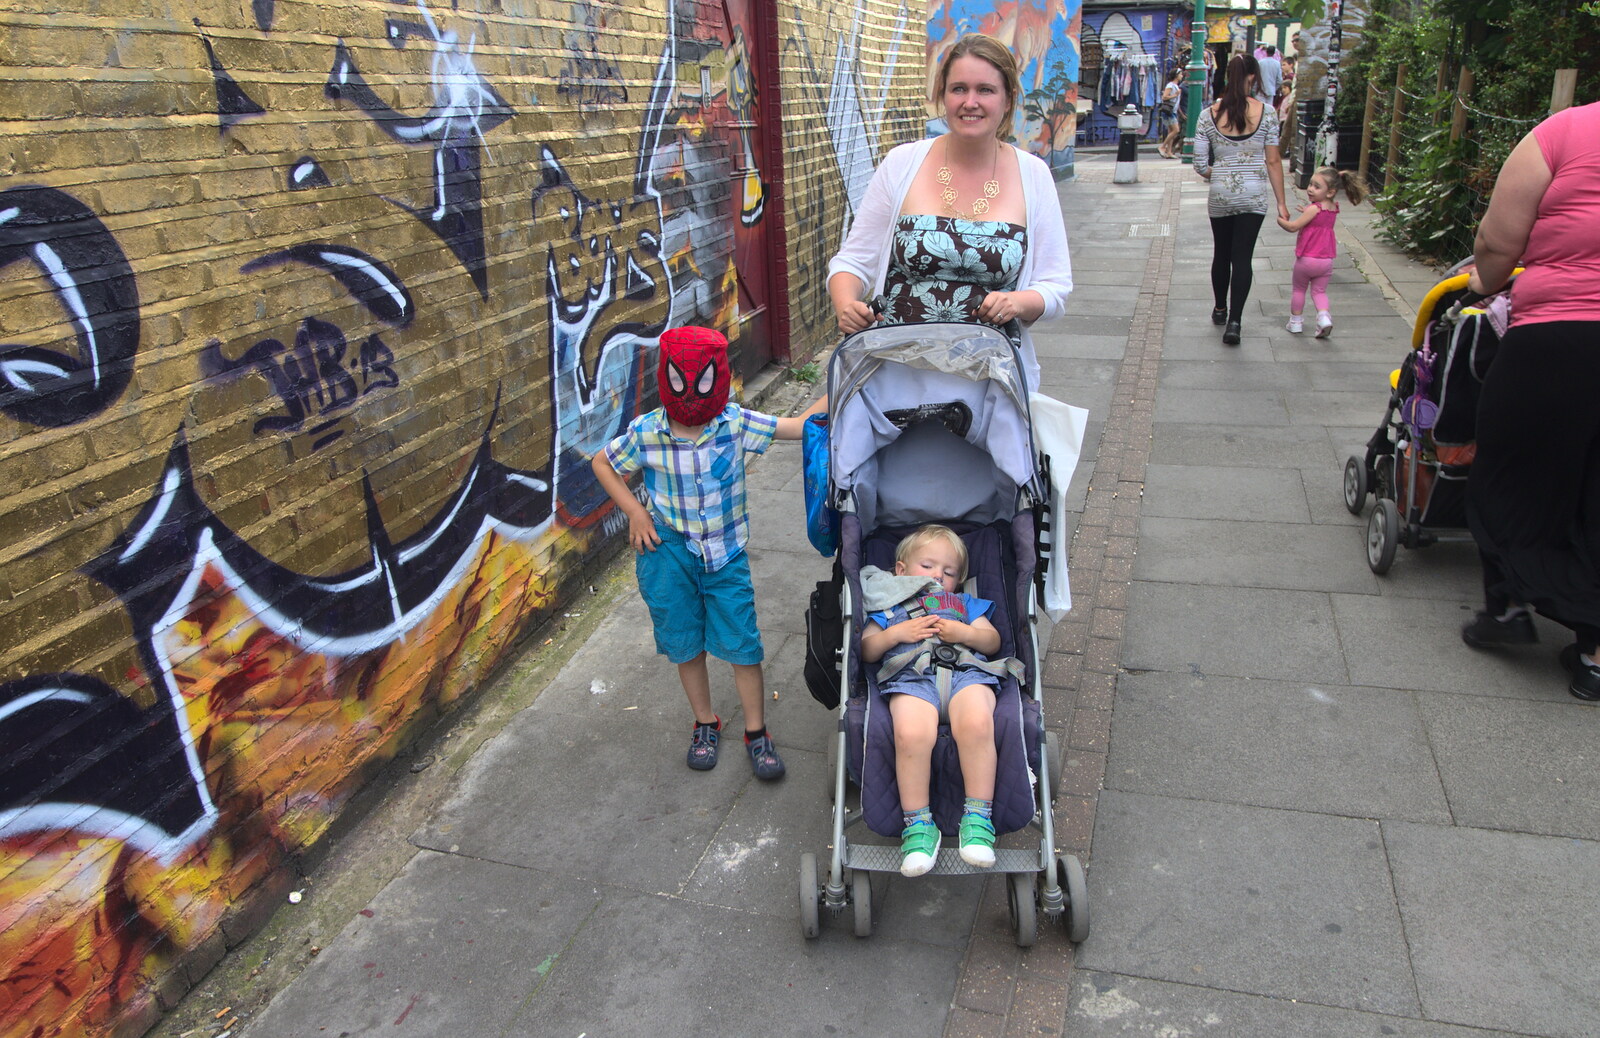 Fred, Gabes and Isobel from Spitalfields and Brick Lane Street Art, Whitechapel, London - 10th August 2013